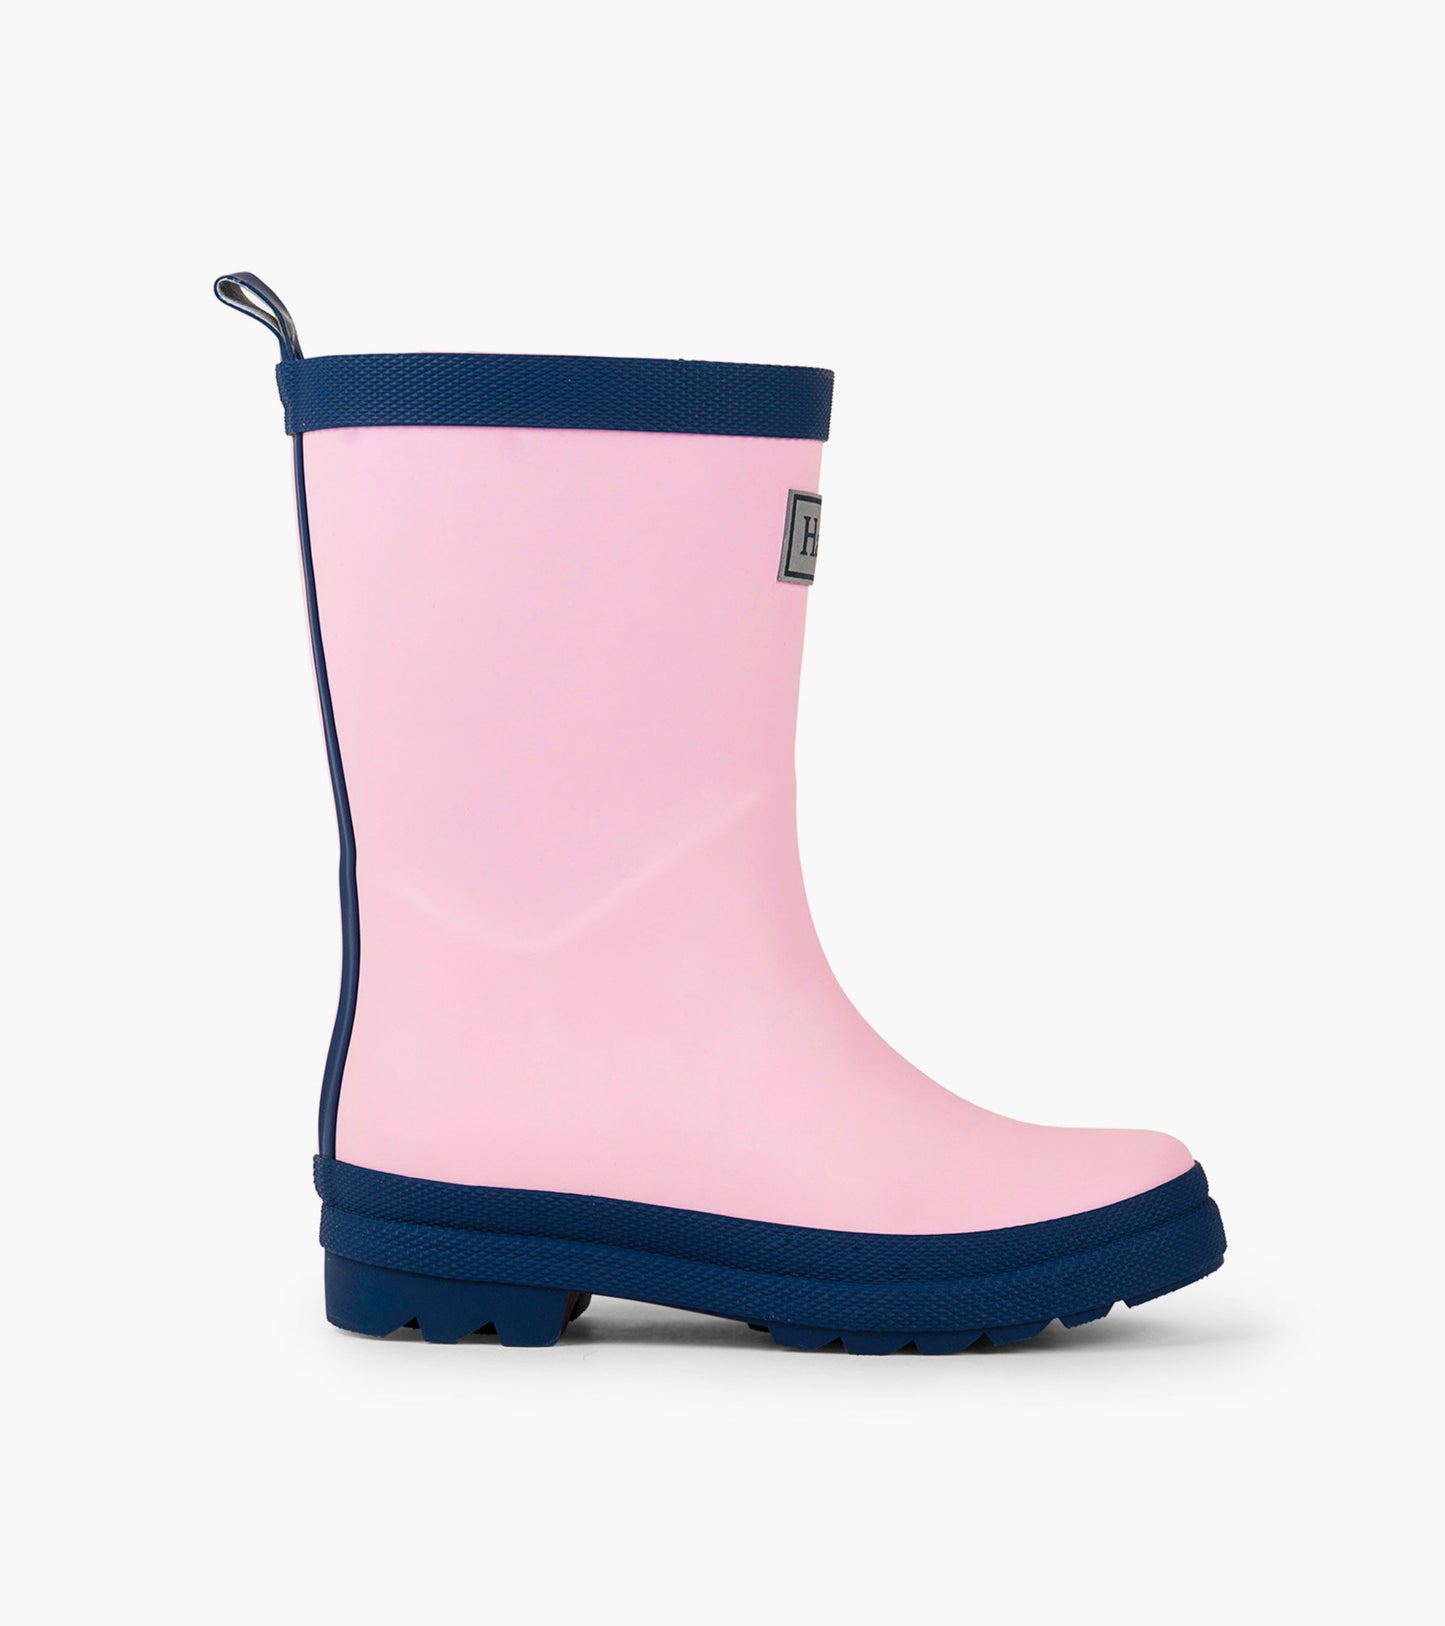 Matte Rain Boots in Pink and Navy  - Doodlebug's Children's Boutique